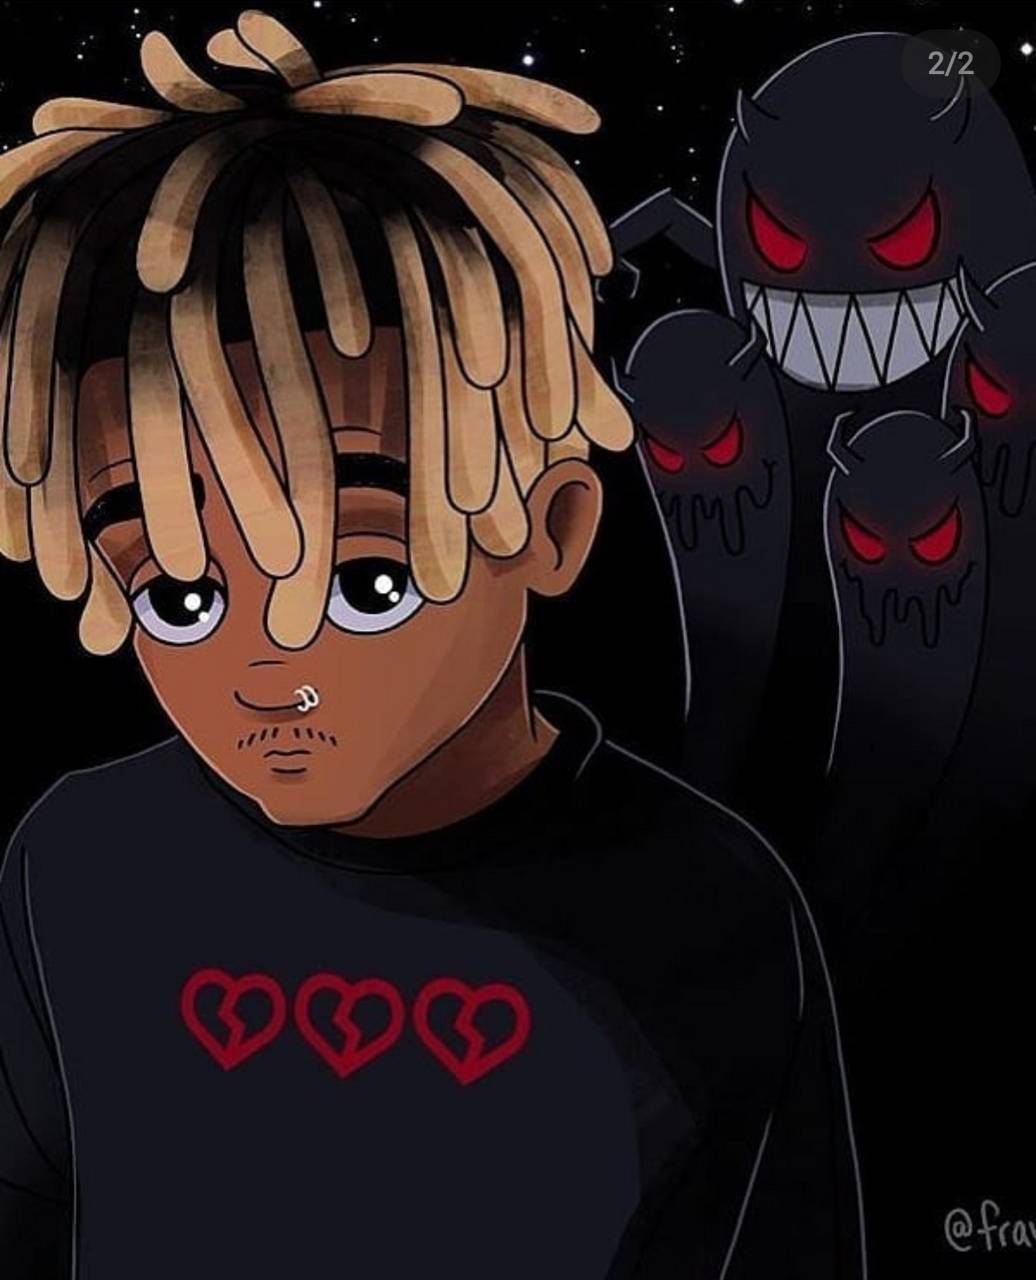 Download Juice Wrld Anime At Nighttime Wallpaper | Wallpapers.com